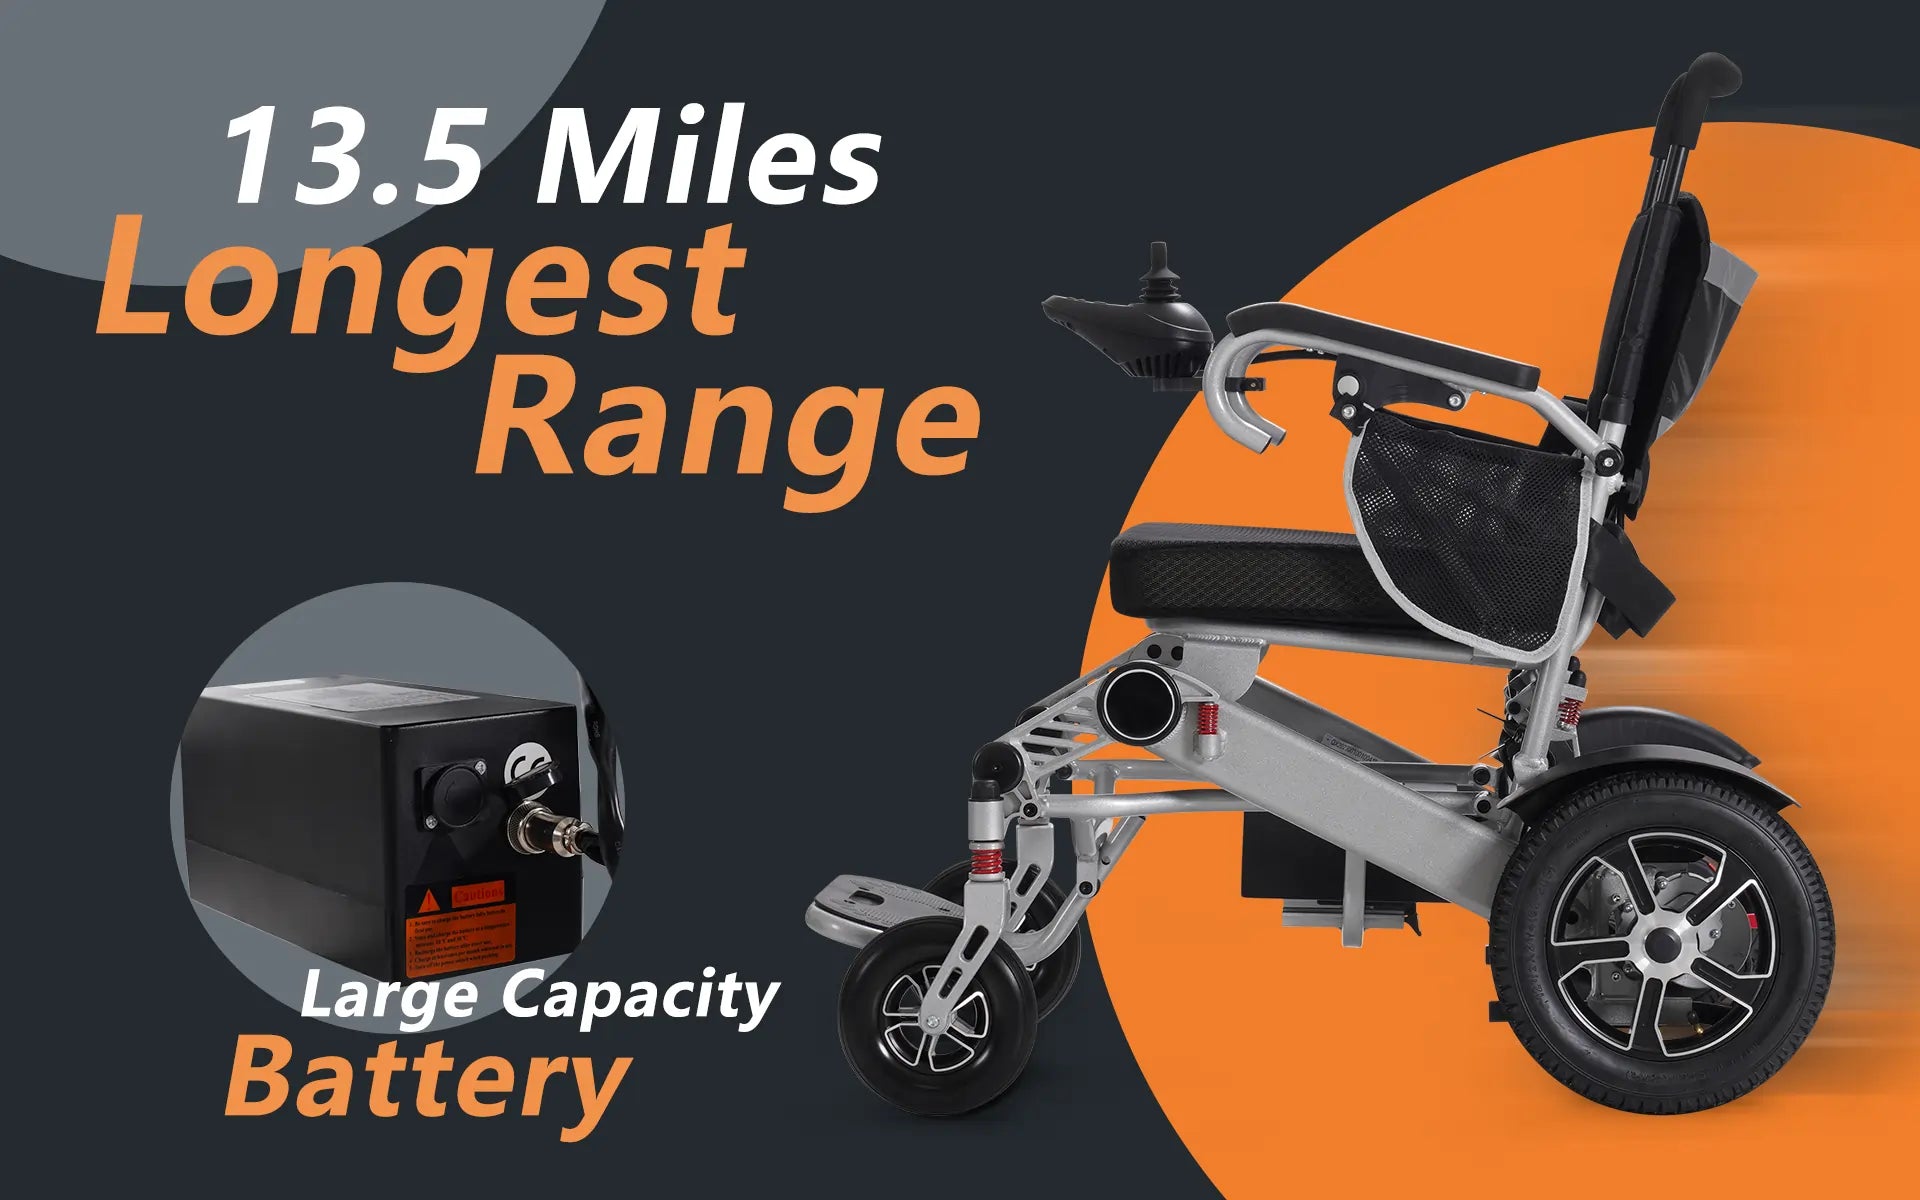 Soulout Electric wheelchair can travel up to 13.5 miles per full charge